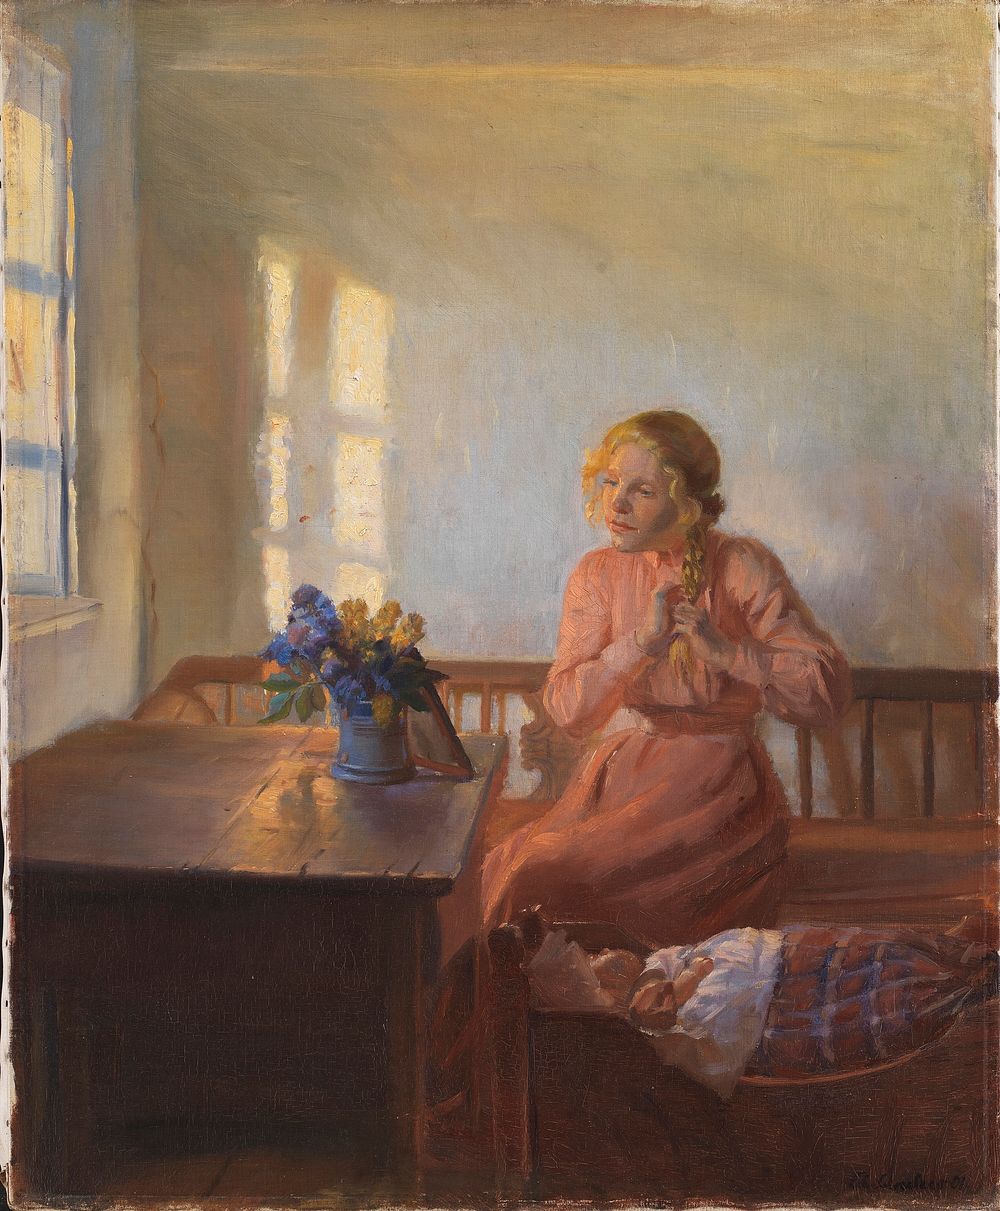 Interior with a young girl braiding her hair by Anna Ancher